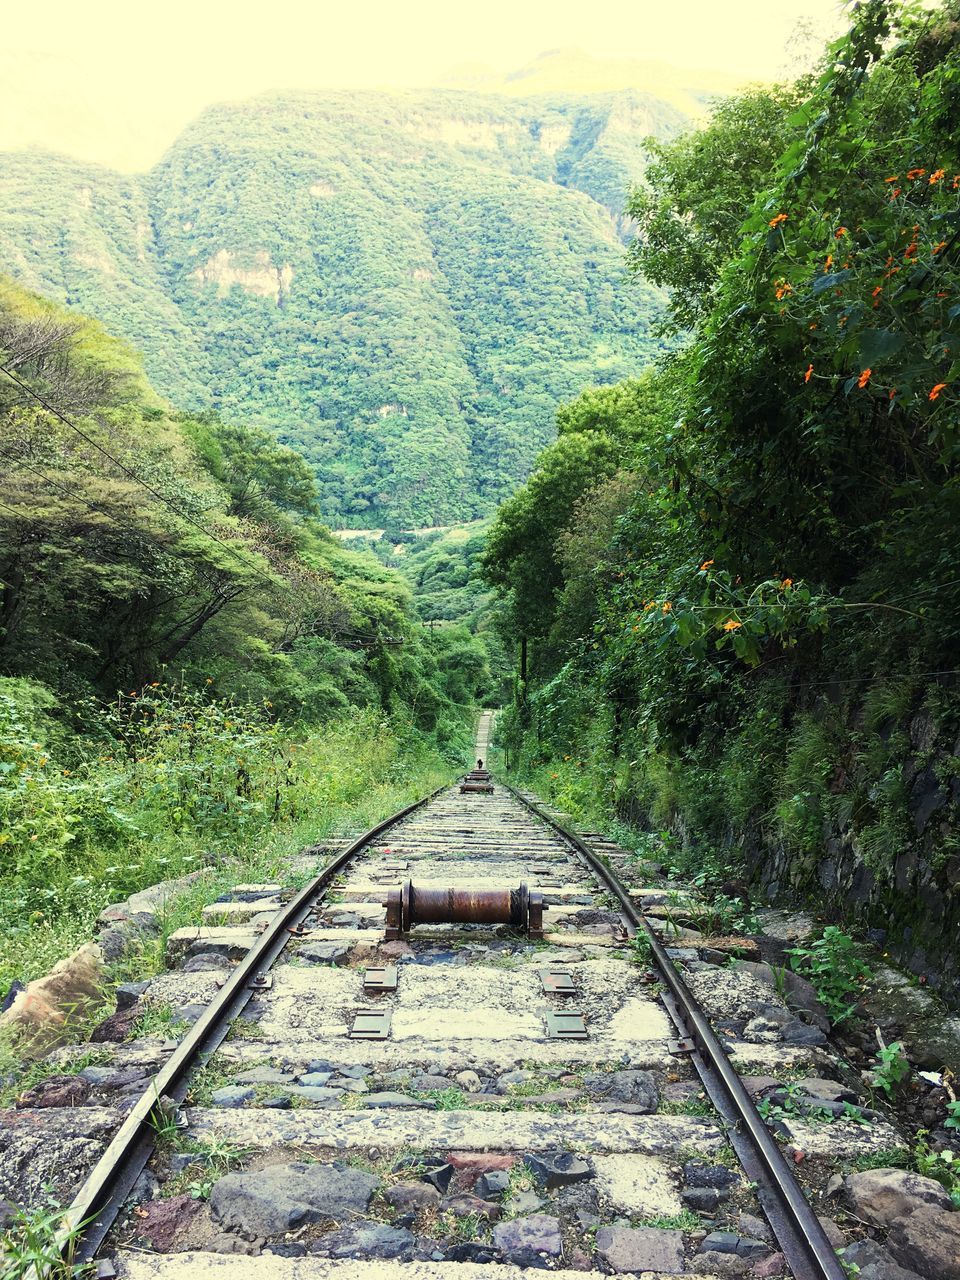 tree, railroad track, transportation, forest, non-urban scene, water, tranquil scene, travel, scenics, travel destinations, mountain, tranquility, nature, green color, growth, beauty in nature, journey, tourism, the way forward, stream, vacations, day, curve, outdoors, diminishing perspective, green